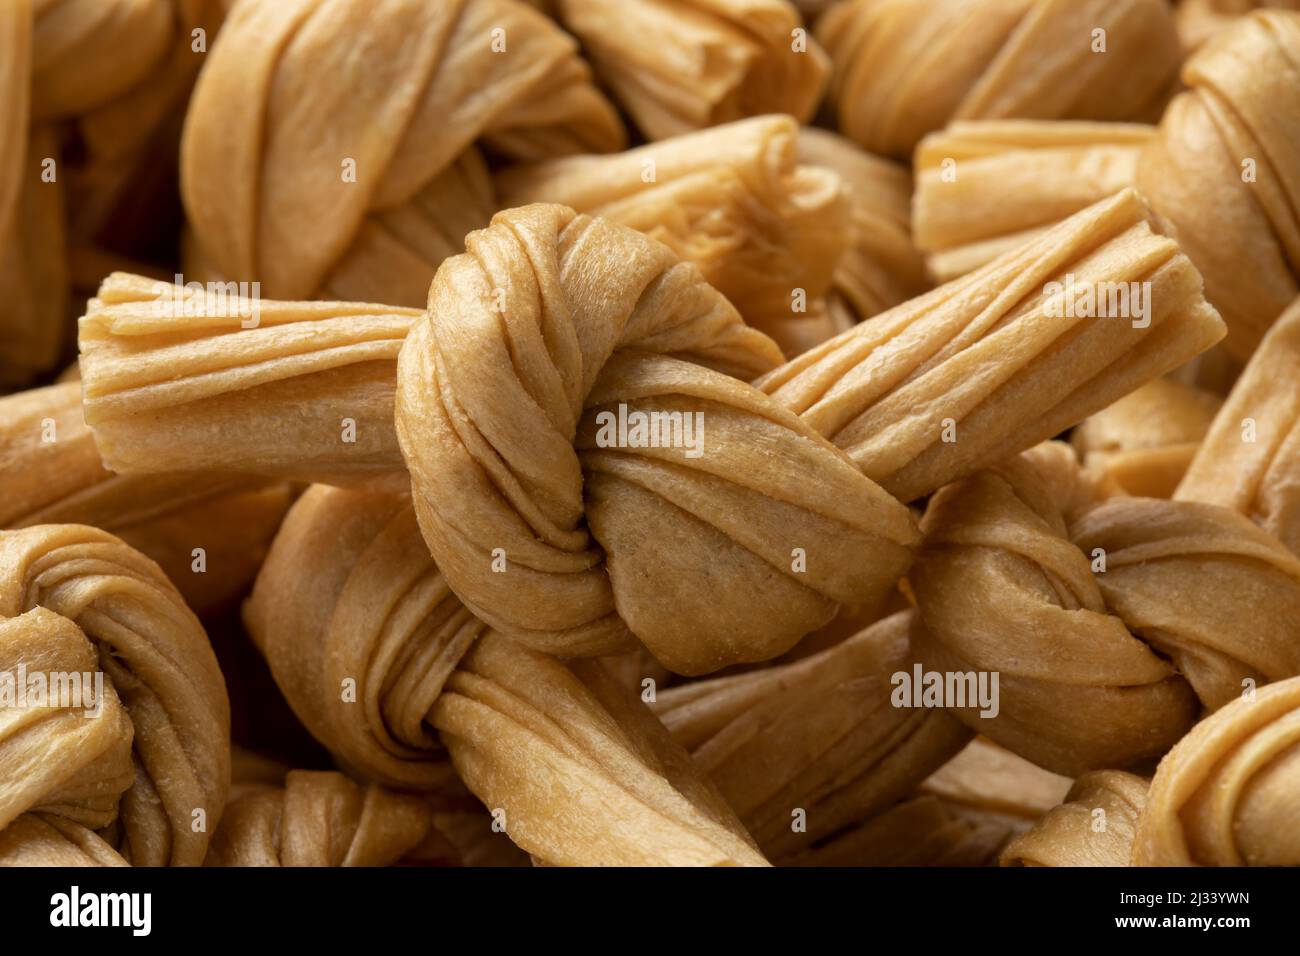 Uncooked bean curd knot full frame close up as background Stock Photo